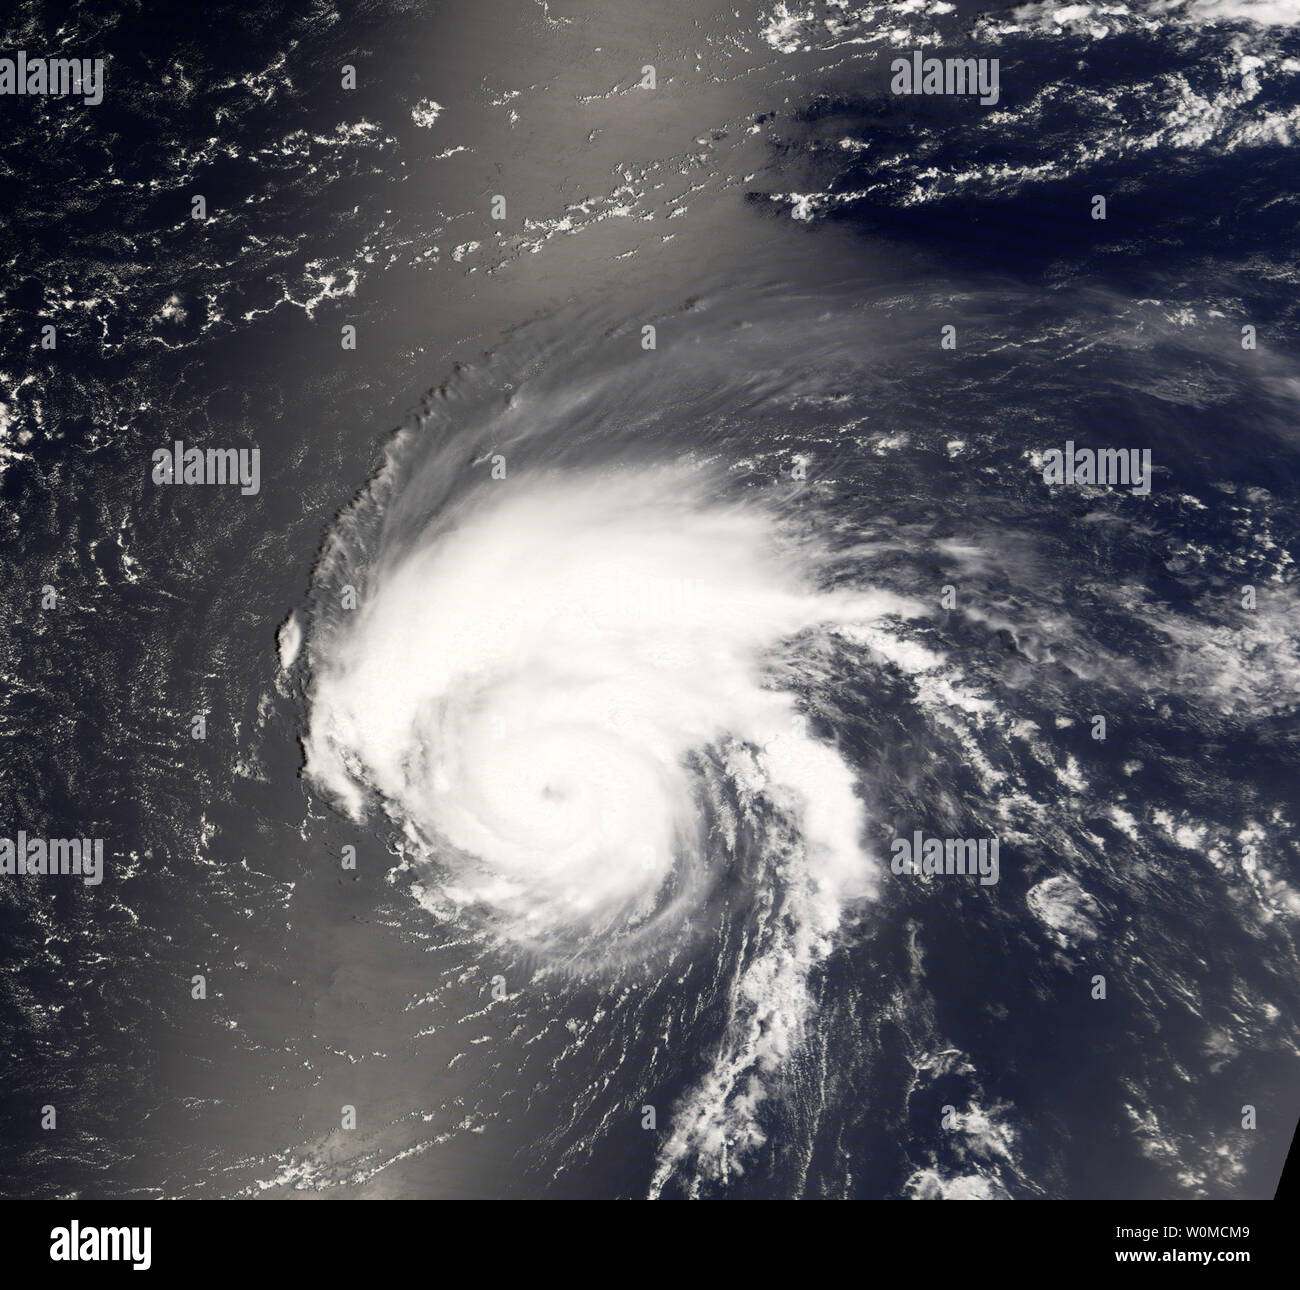 This natural-color image of Hurricane Bertha was captured by the Moderate Resolution Imaging Spectroradiometer (MODIS) on NASA's Terra satellite on July 9, 2008. On July 16, 2008, the U.S. National Hurricane Center in Miami said Bertha made a loop in the central Atlantic Ocean is moving slowly east at 3 mph, 380 miles northeast of Bermuda. The storm had sustained winds of 70 mph with gusts up to 85 mph. (UPI Photo/NASA/Jesse Allen MODIS Rapid Response Team) Stock Photo